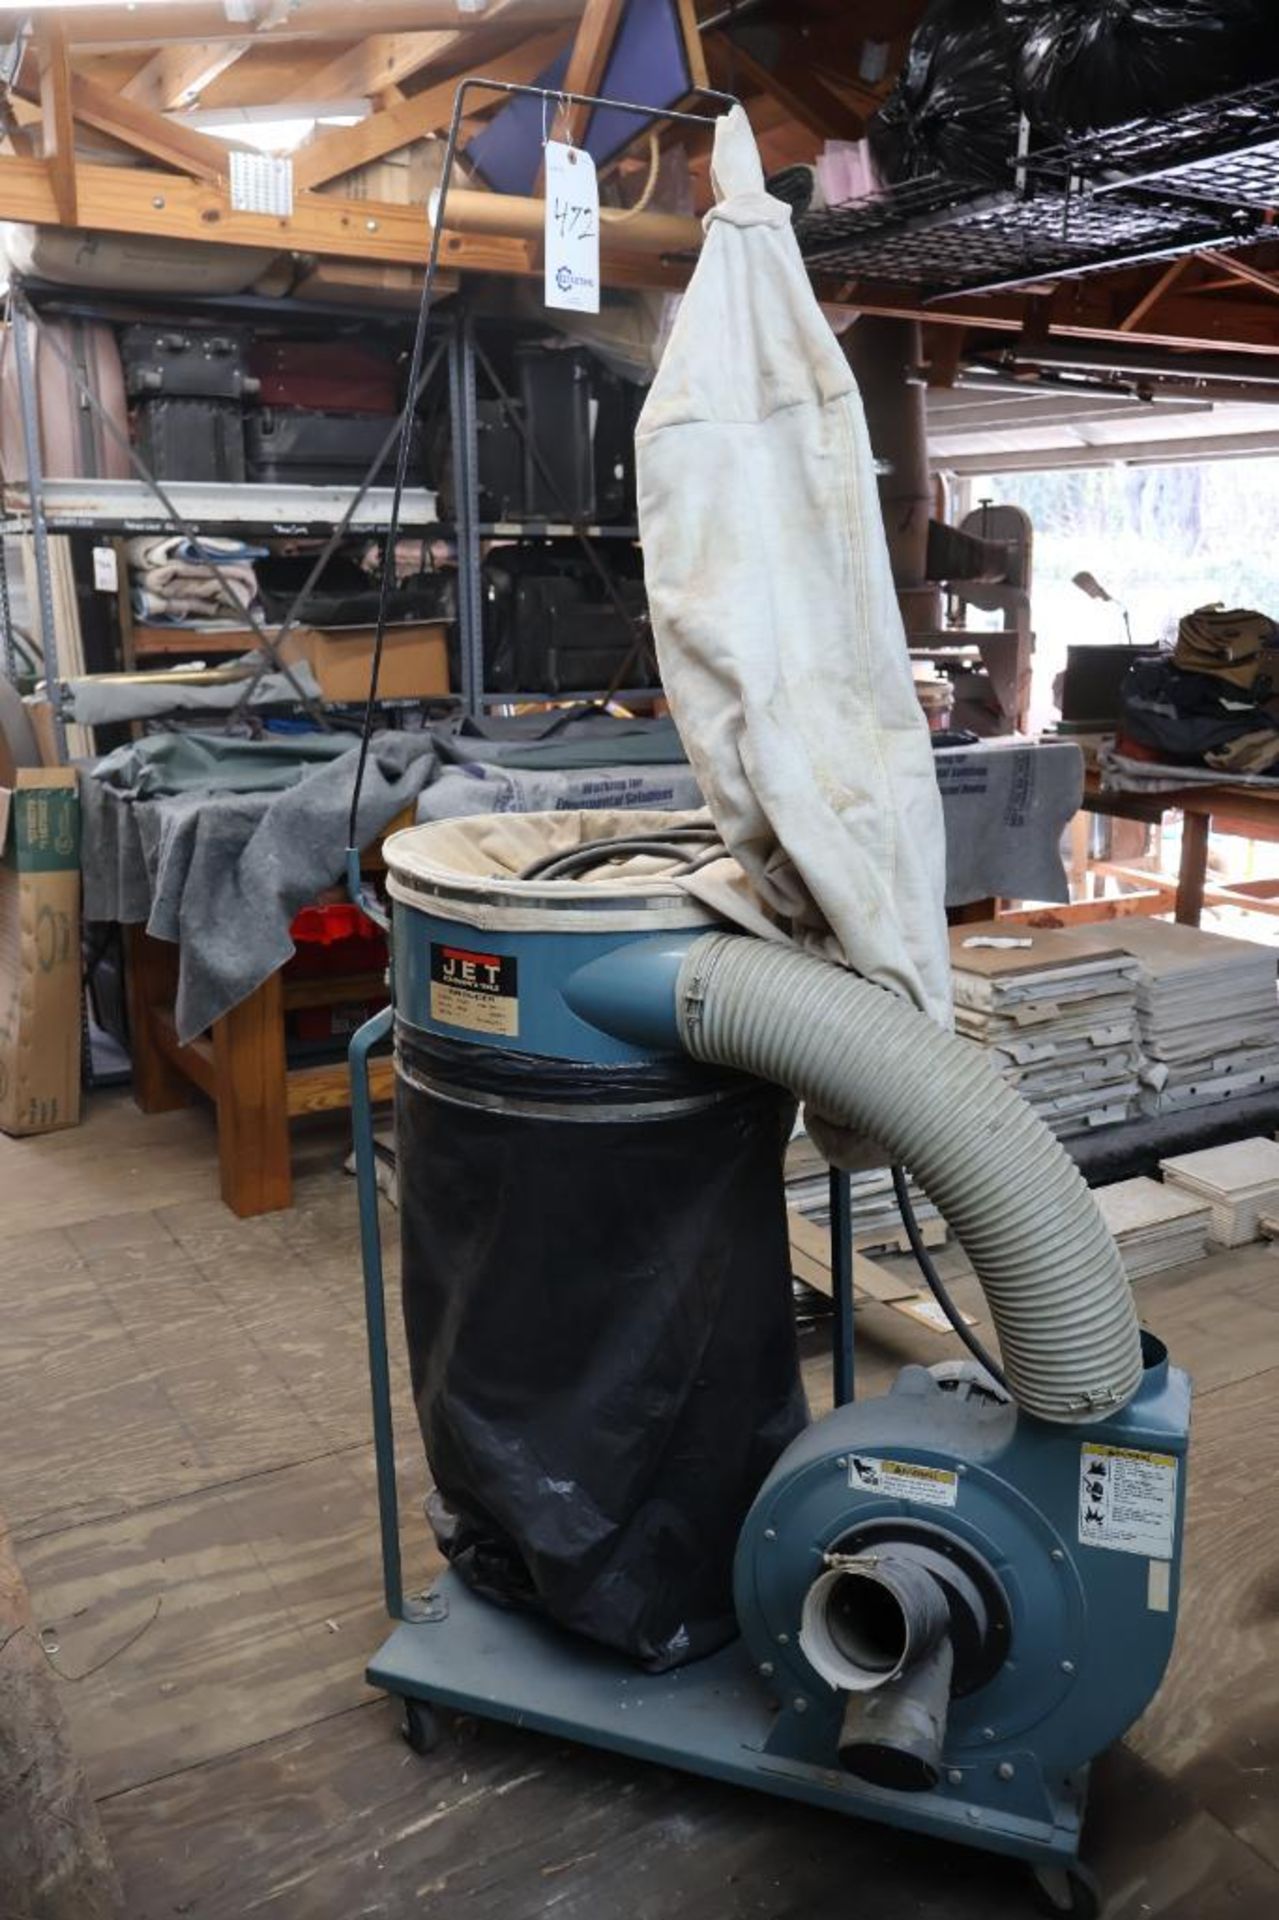 Jet DC1200 dust collector